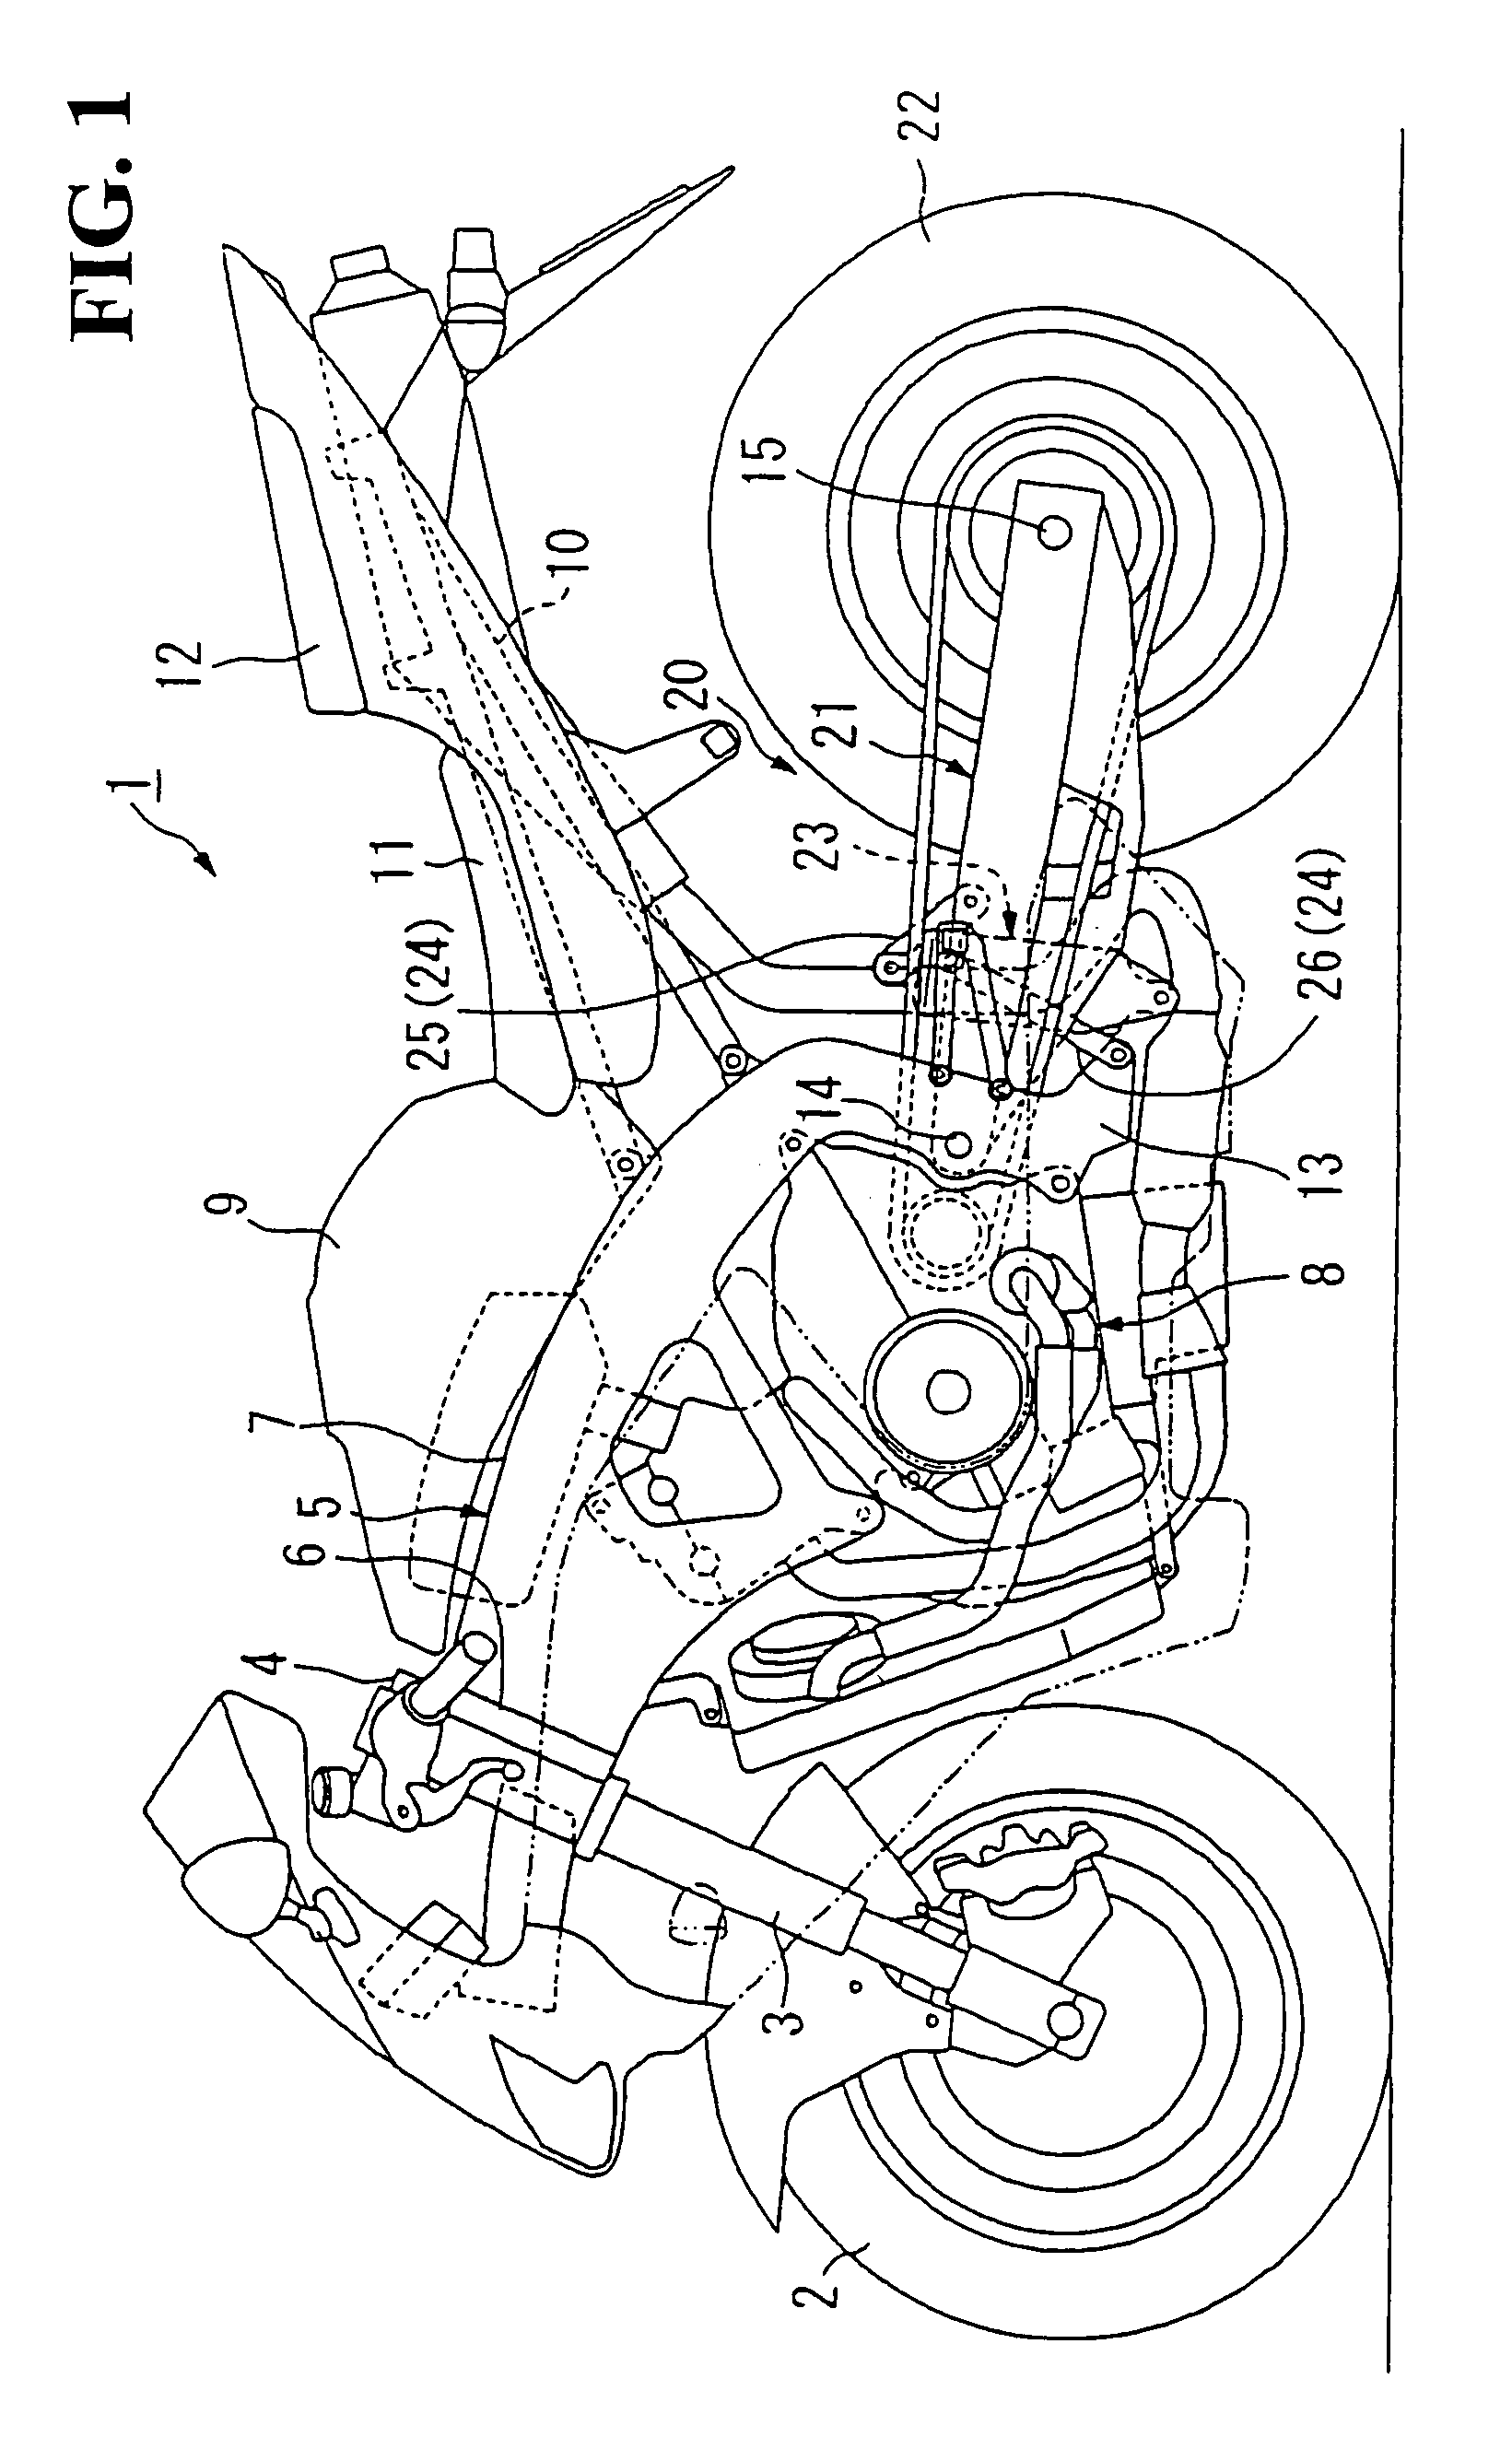 Swingarm suspension system for vehicle